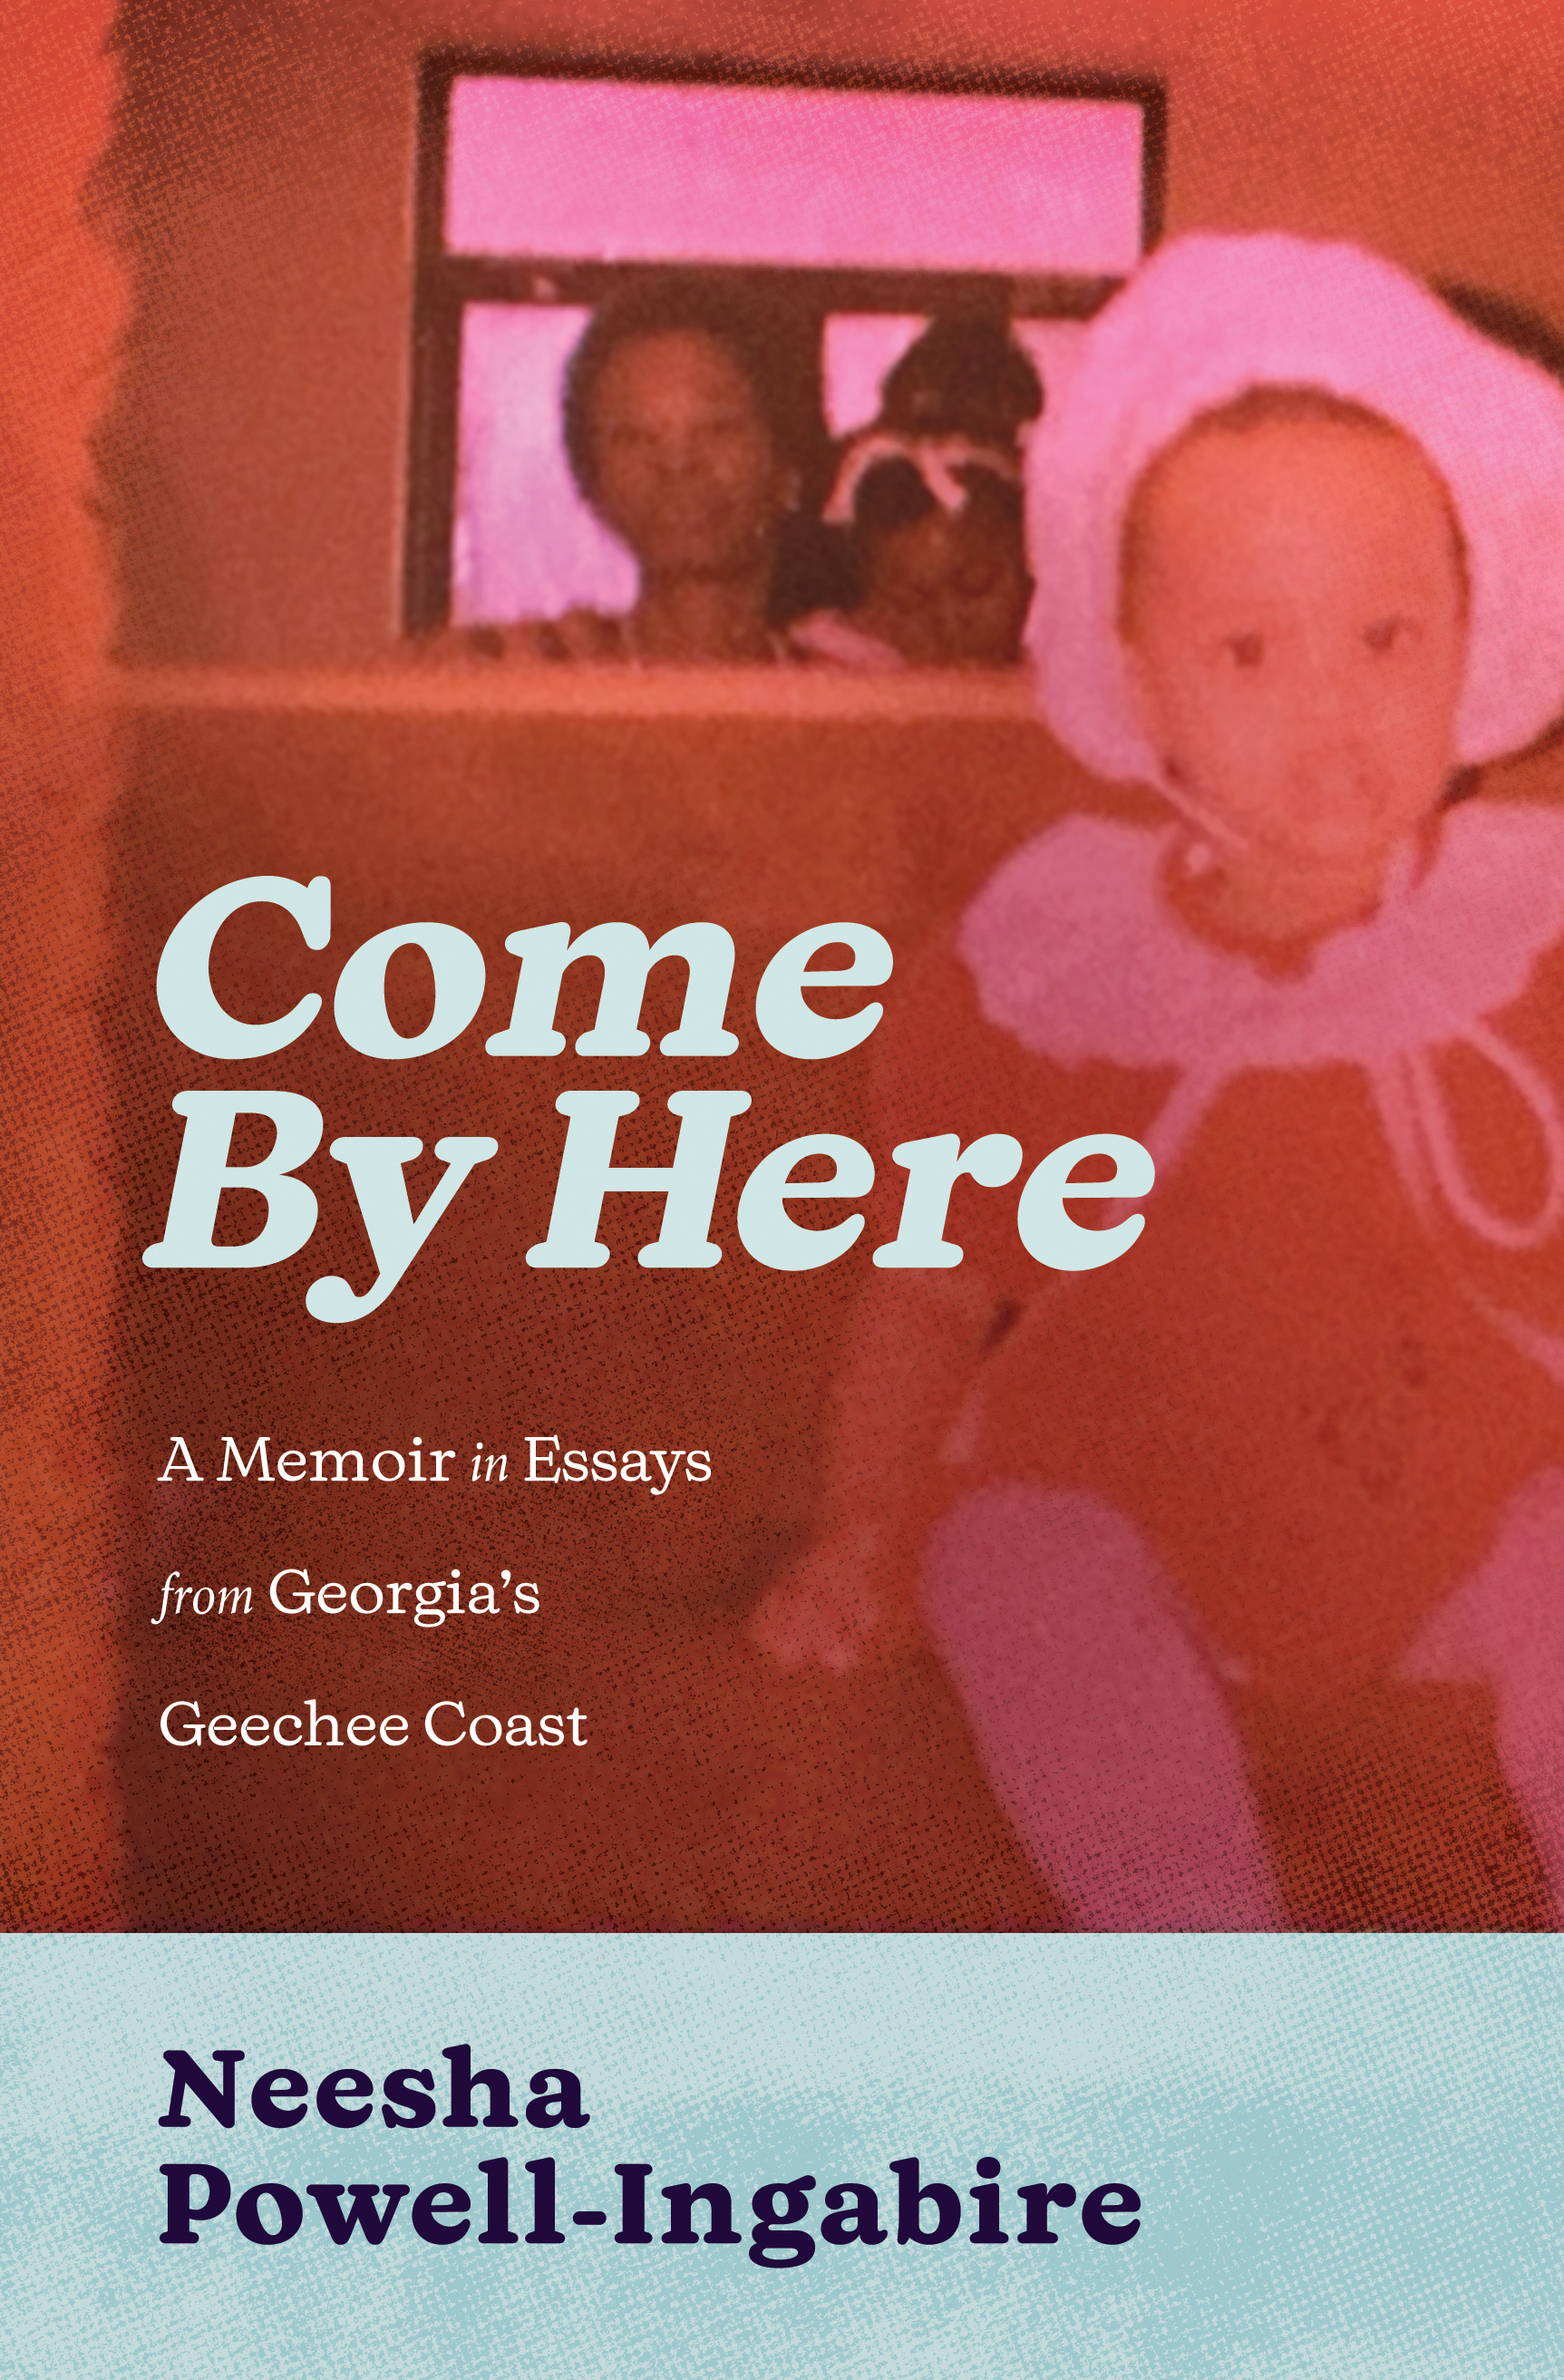 Come By Here: A Memoir in Essays from Georgia’s Geechee Coast